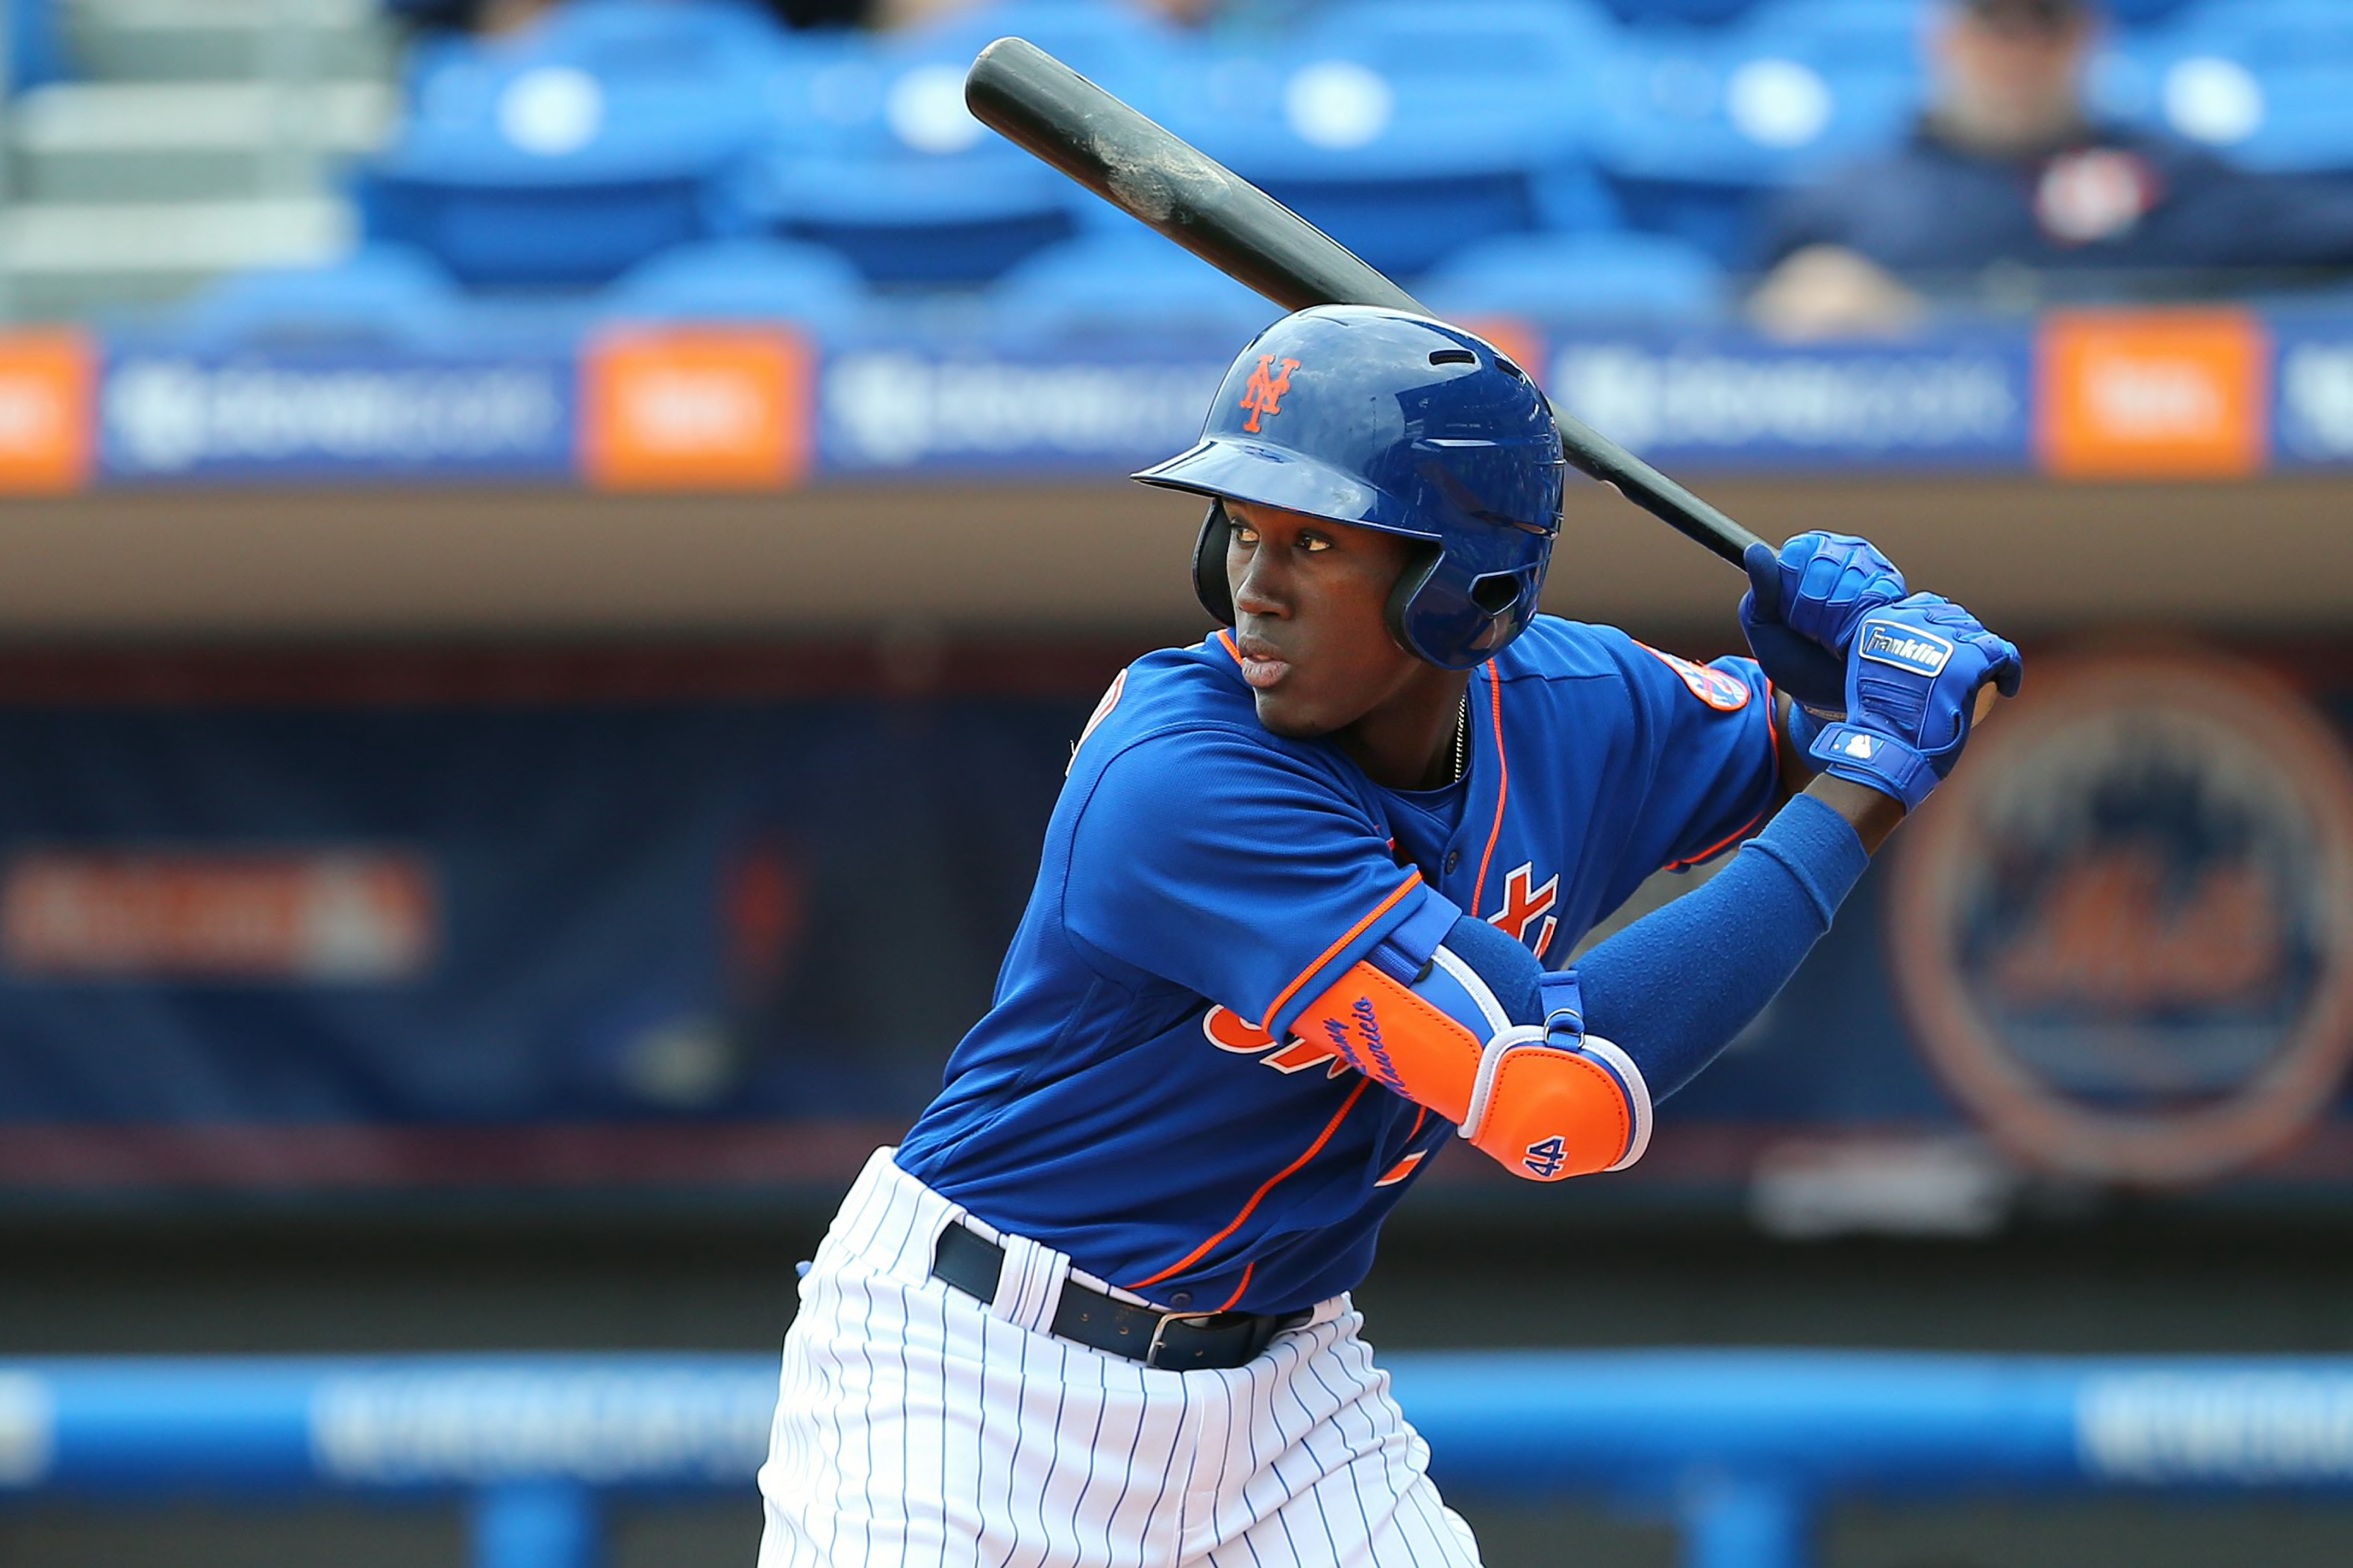 NY Mets 3 prospect candidates for the 2022 Future's Game